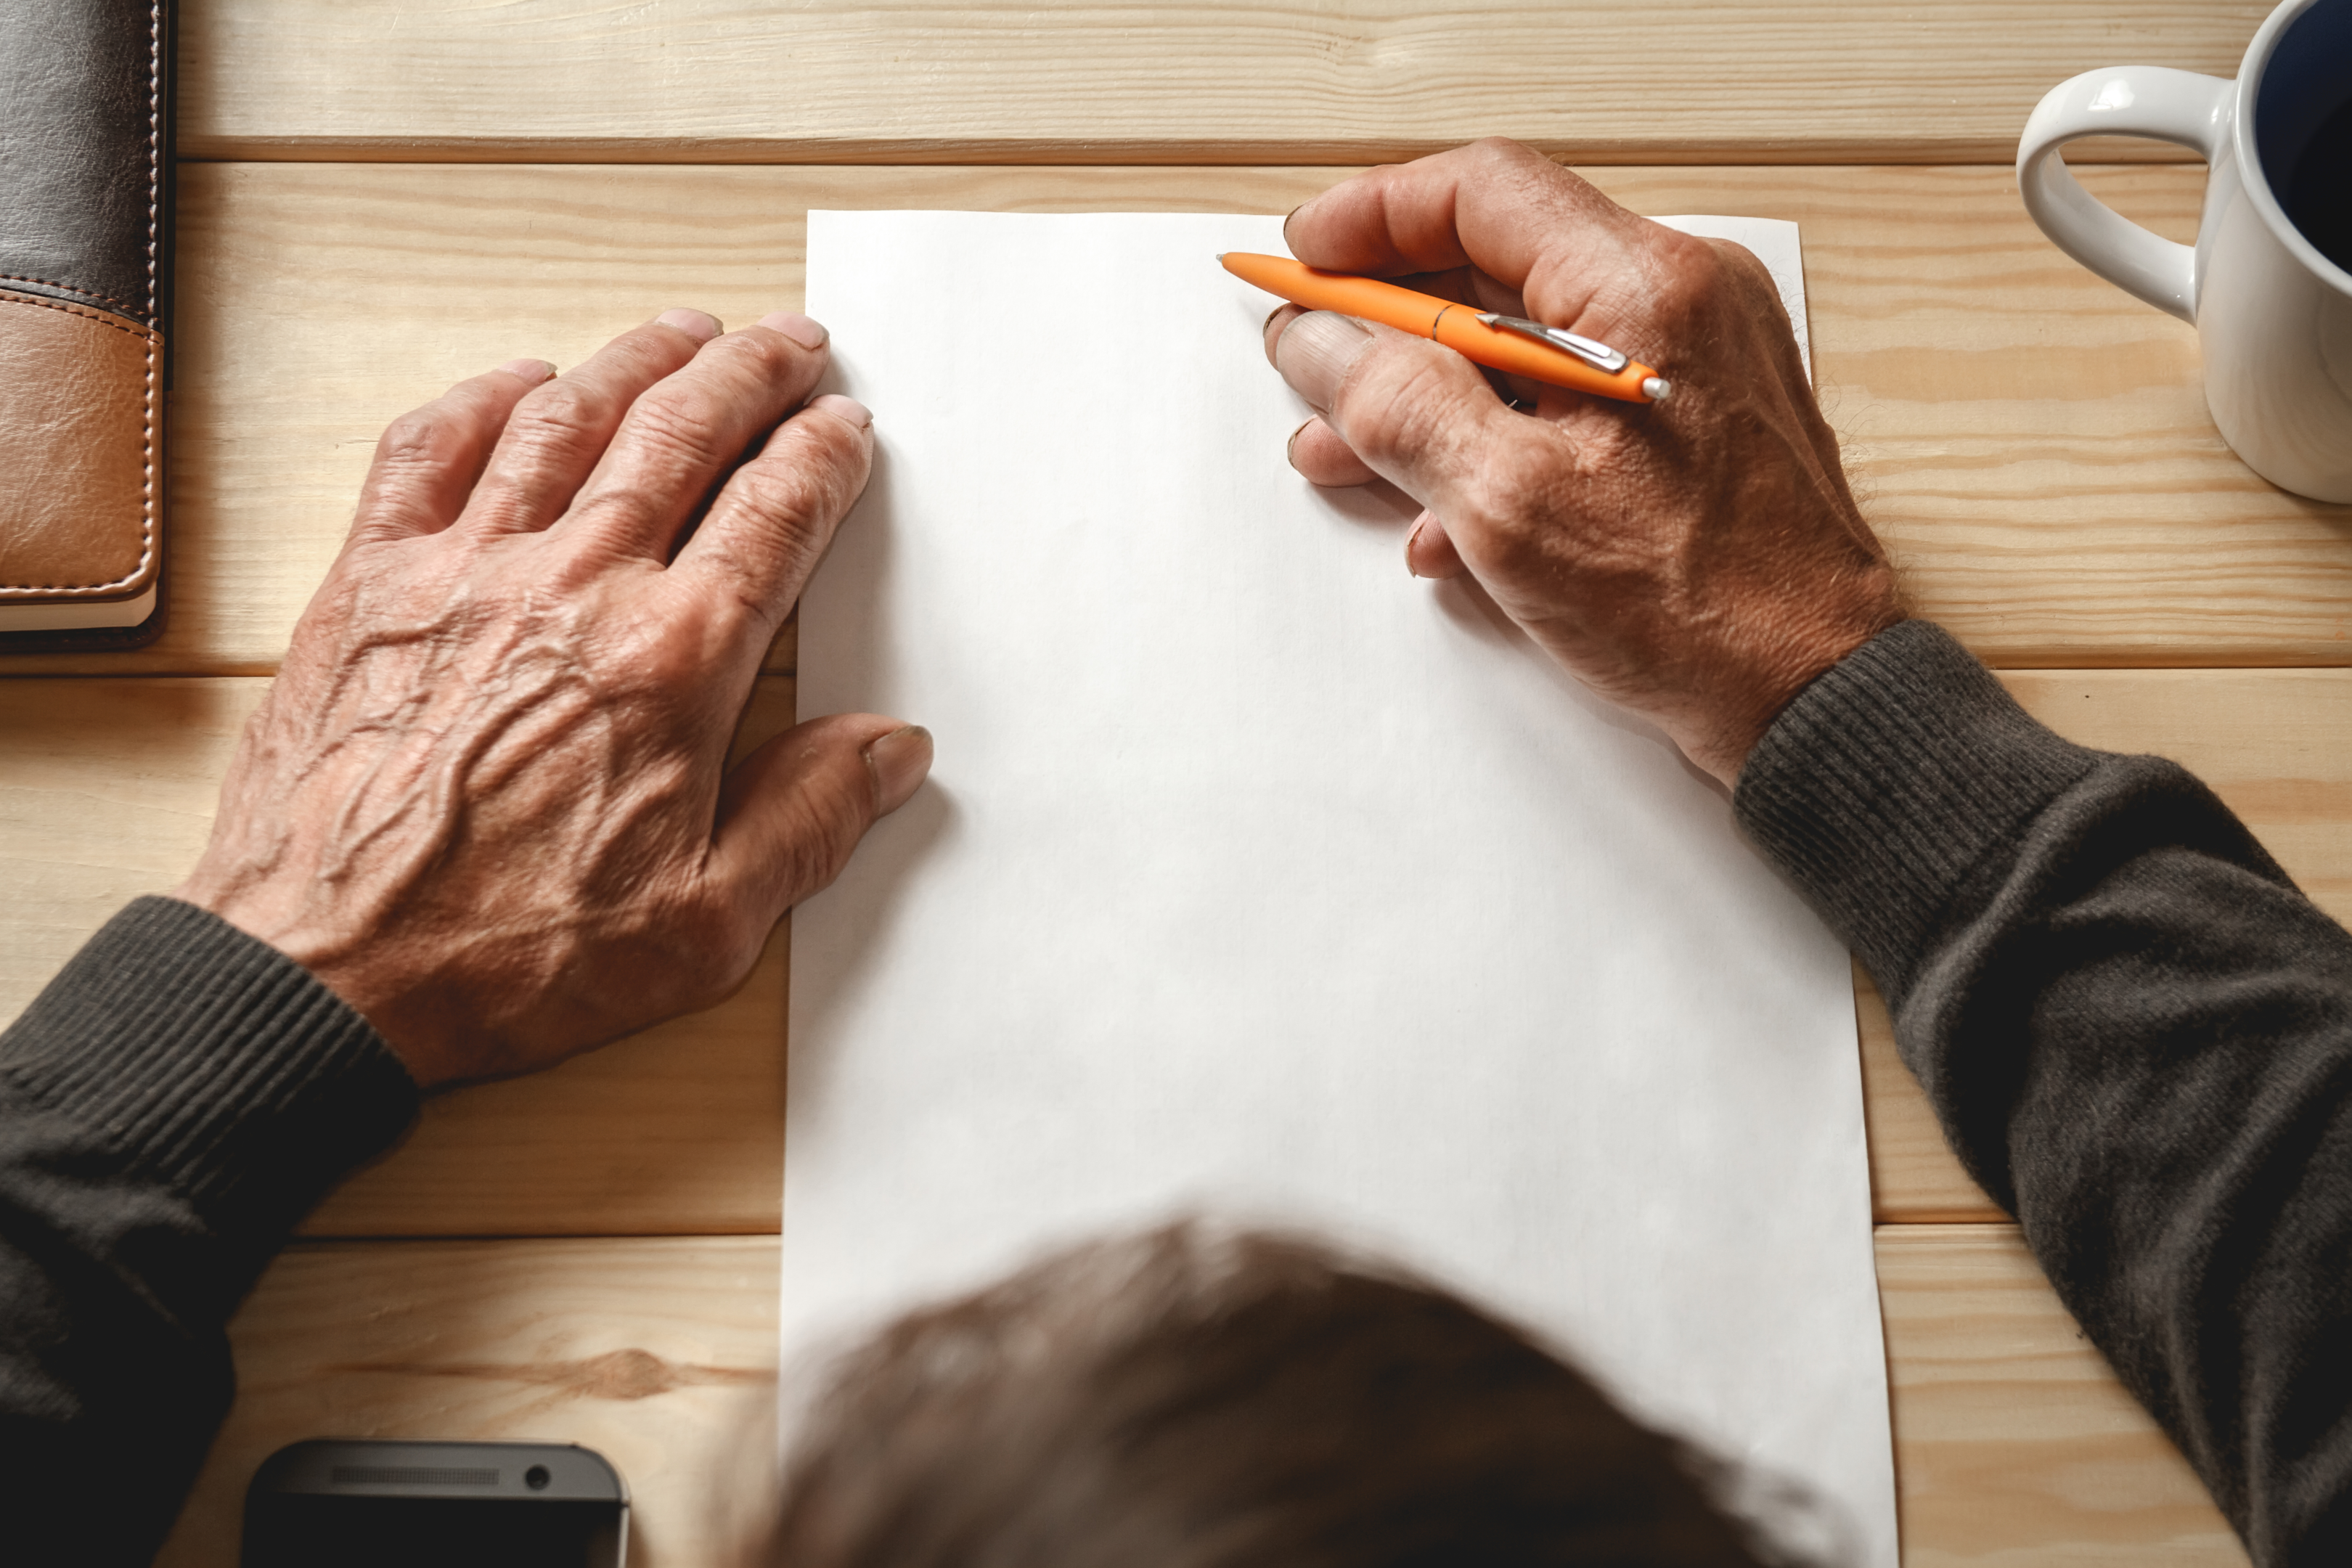 Explore four simple ways to write a will and secure your legacy.